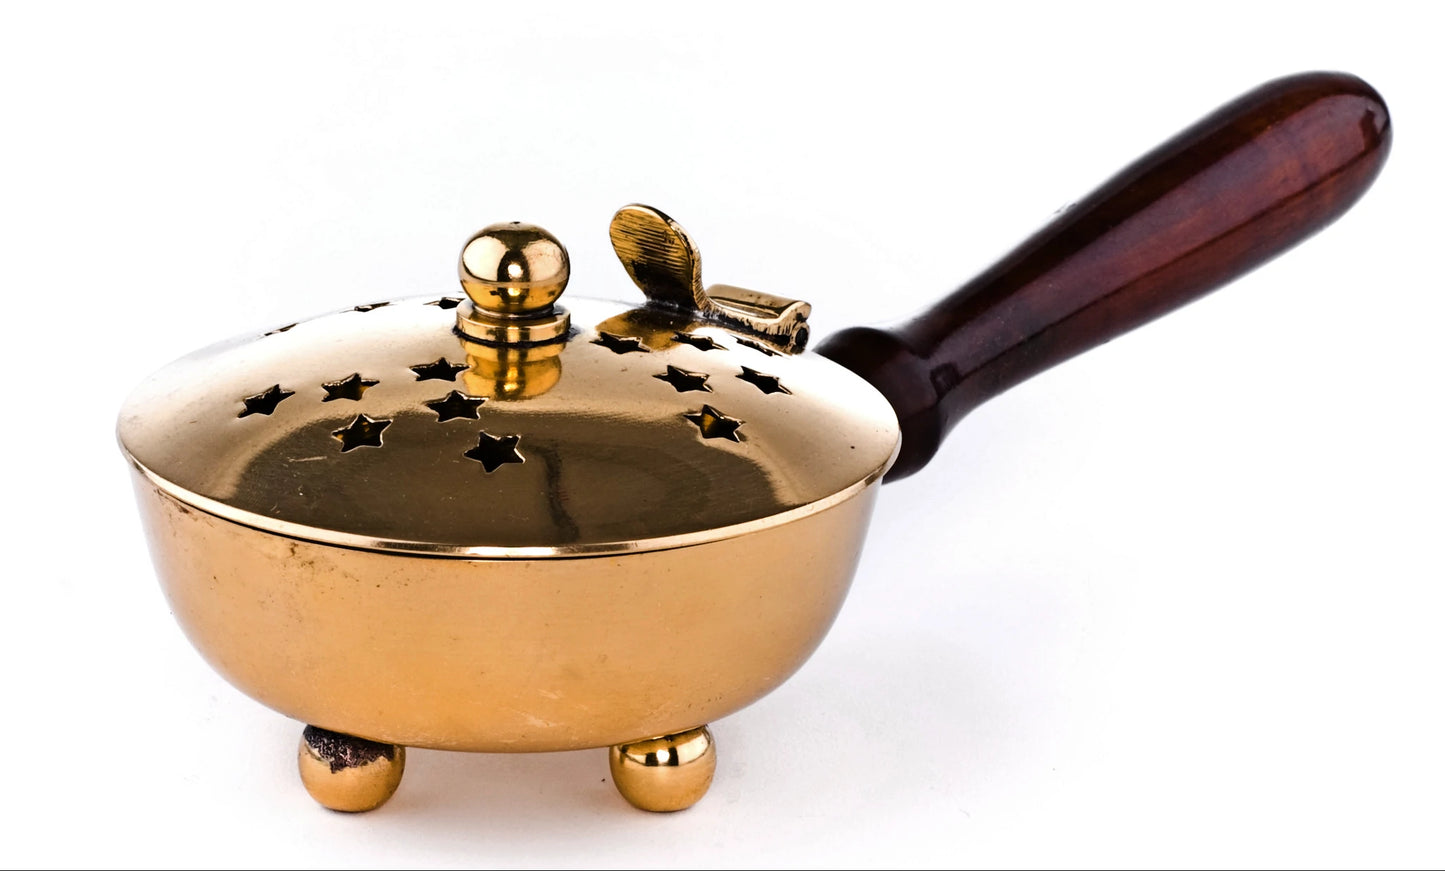 Brass Incense Burner with wooden handle